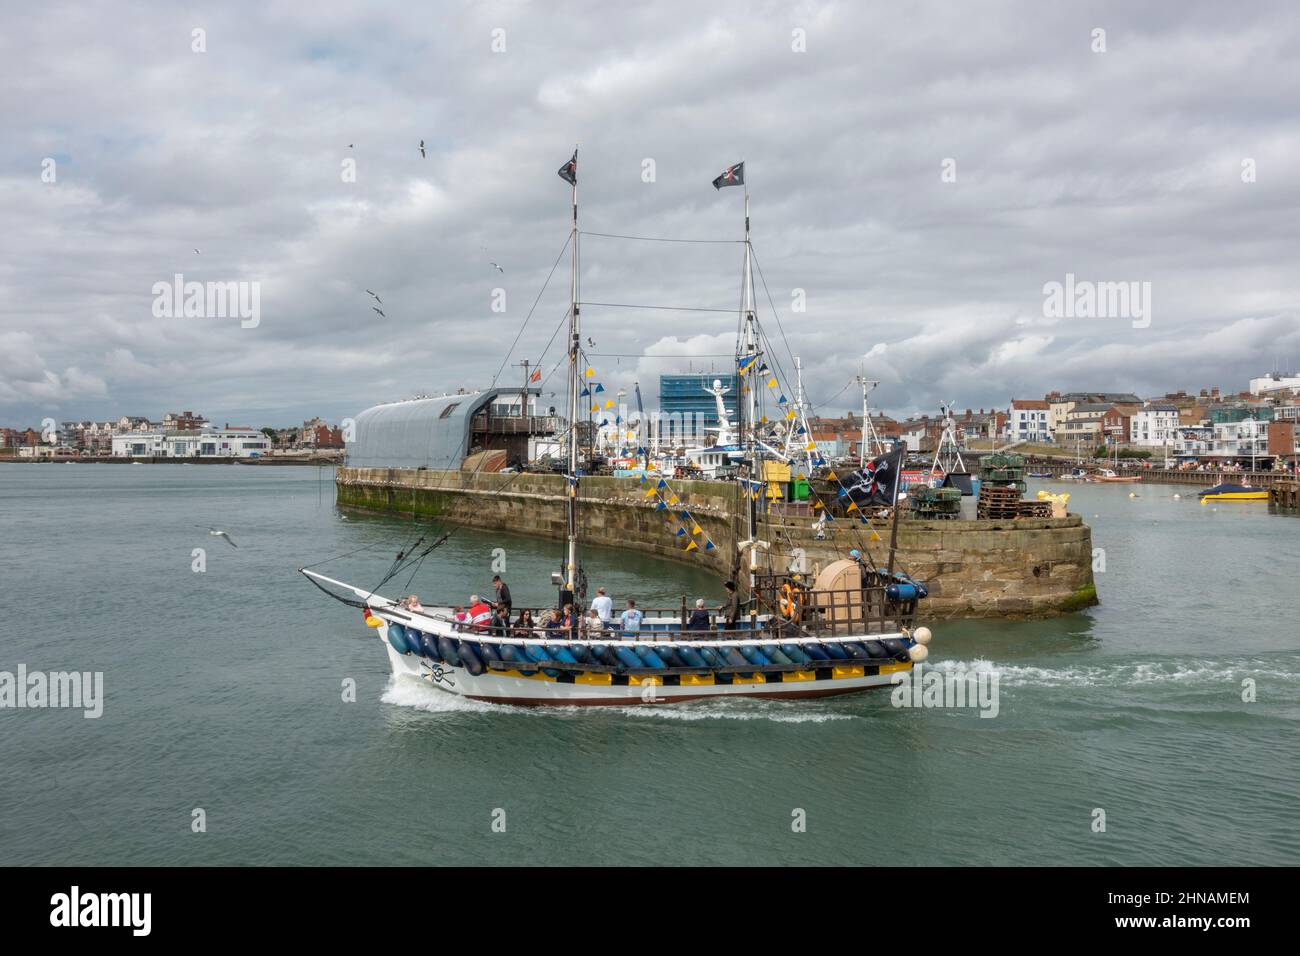 The Pirate Ship boat tour boat departing the harbour in Bridlington, East Yorkshire, UK. Stock Photo